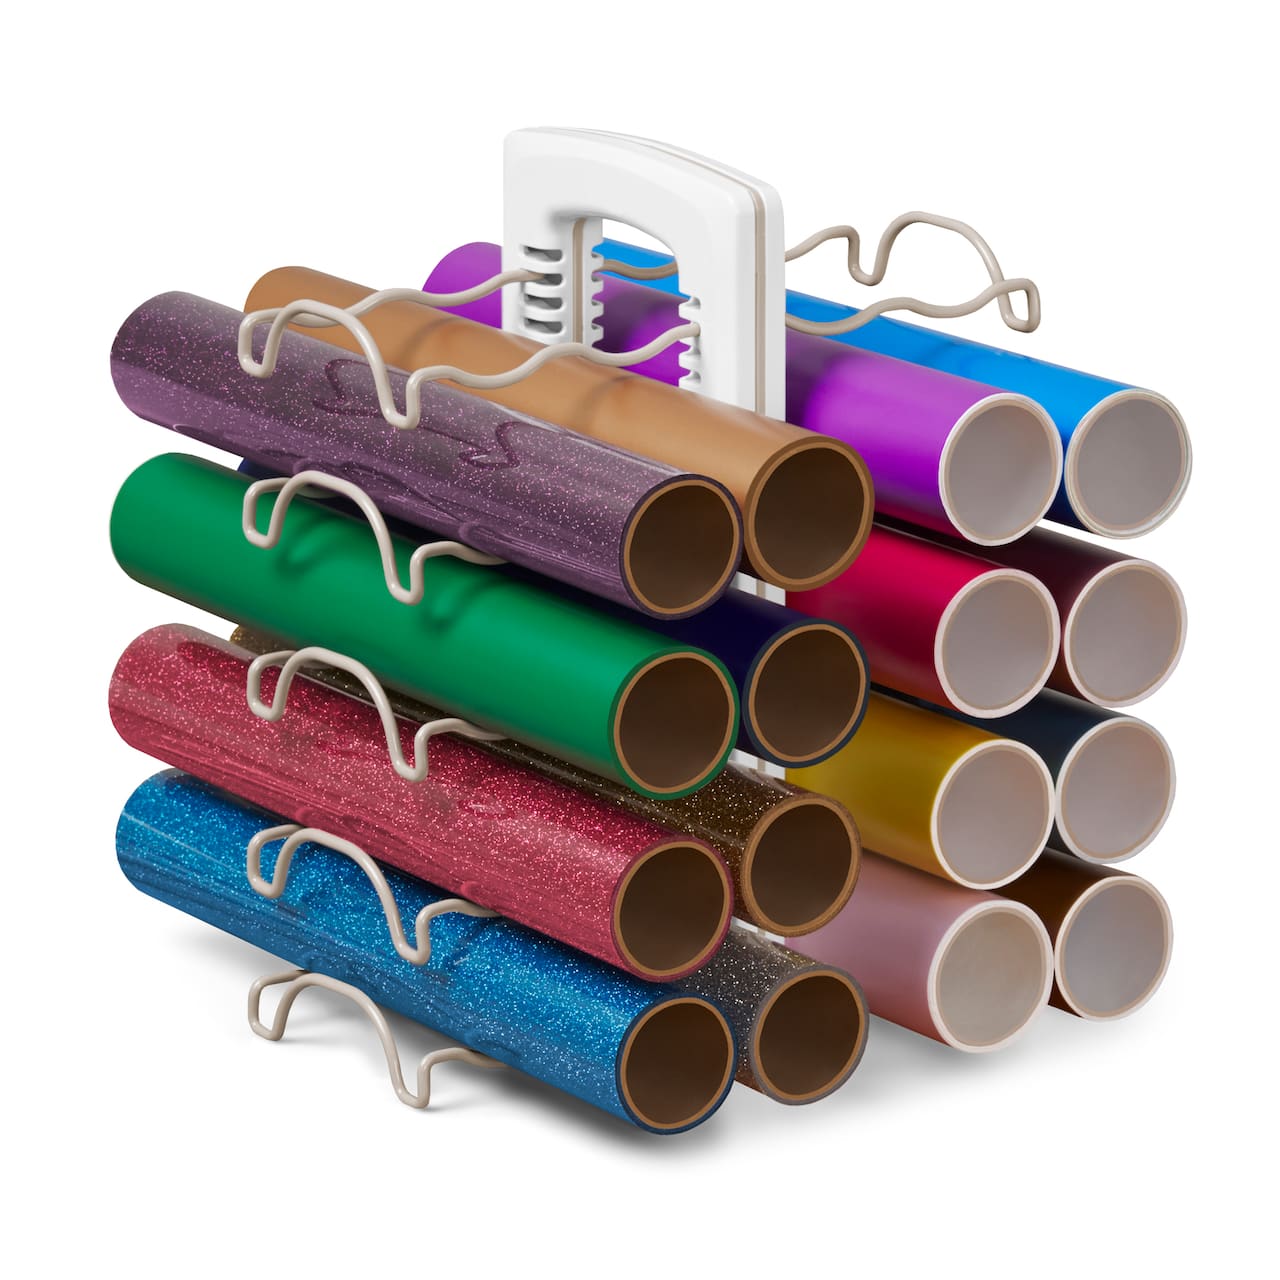 Vinyl Roll Organizer Stand by Simply Tidy™